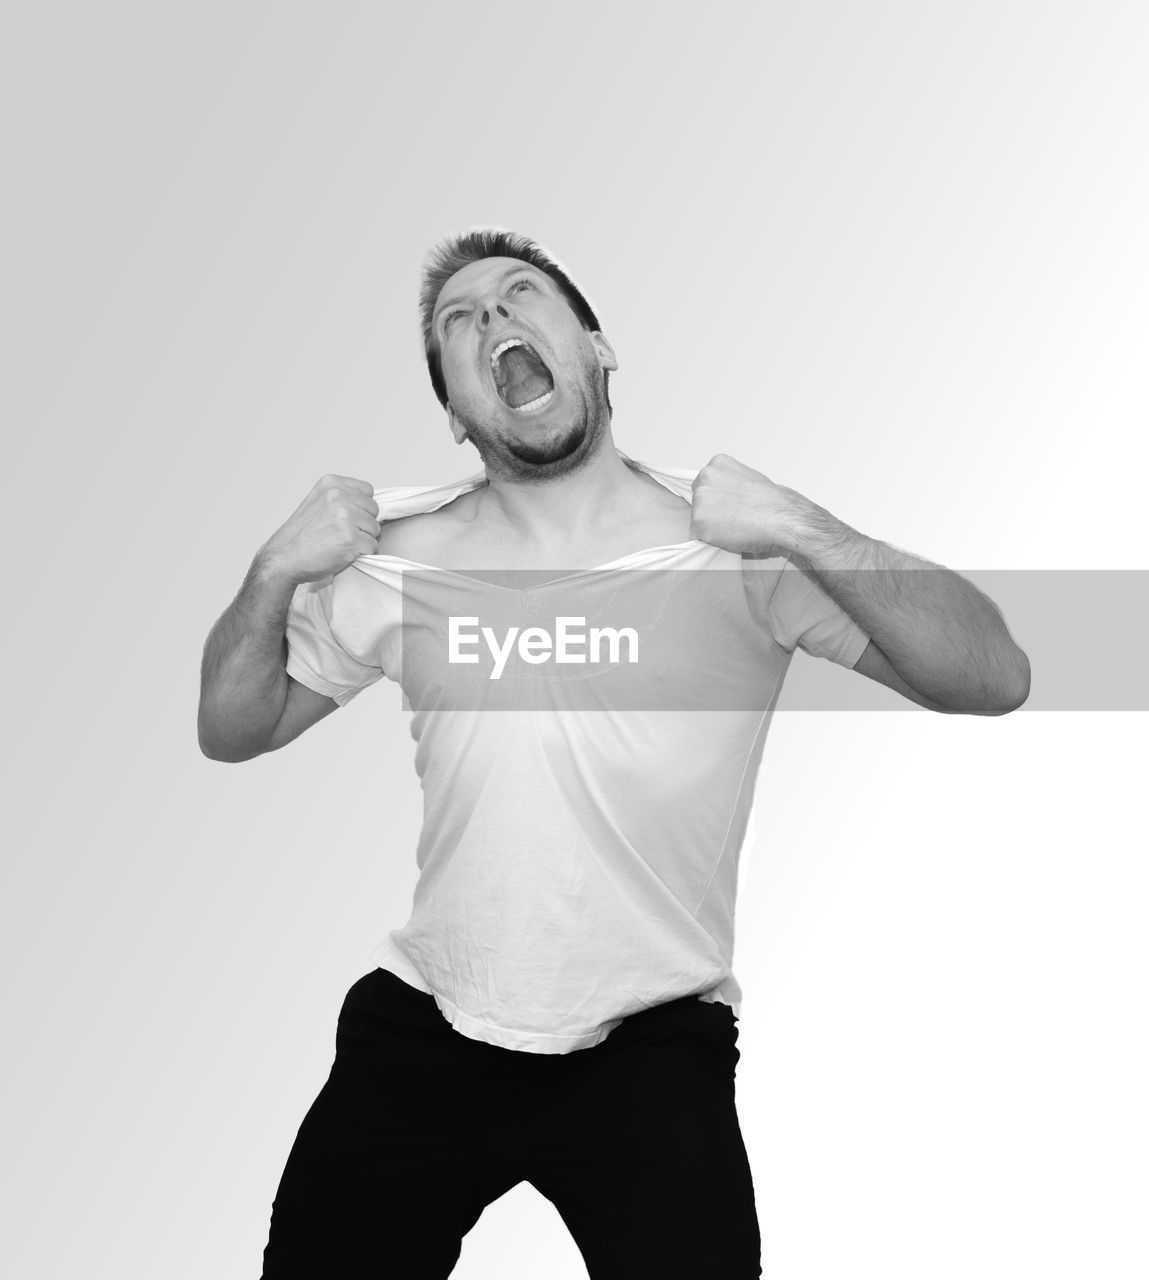 Distraught man tearing t-shirt against white background